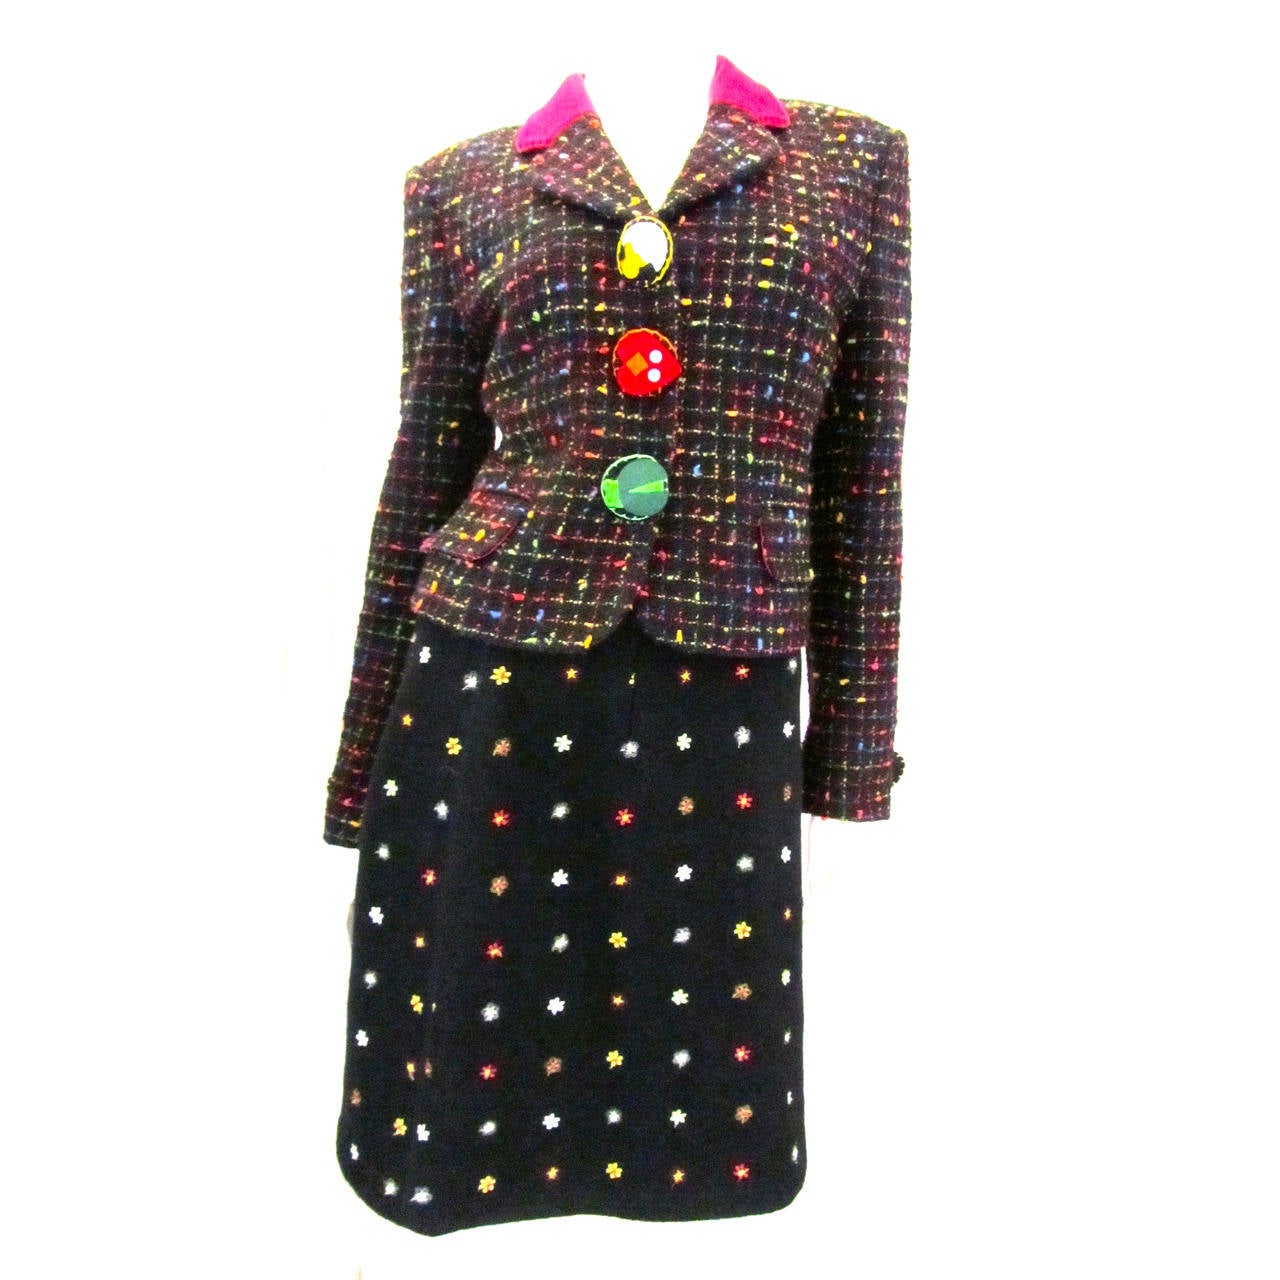 Moschino Cheap and Chic Multi-colored Suit with Animal Buttons For Sale